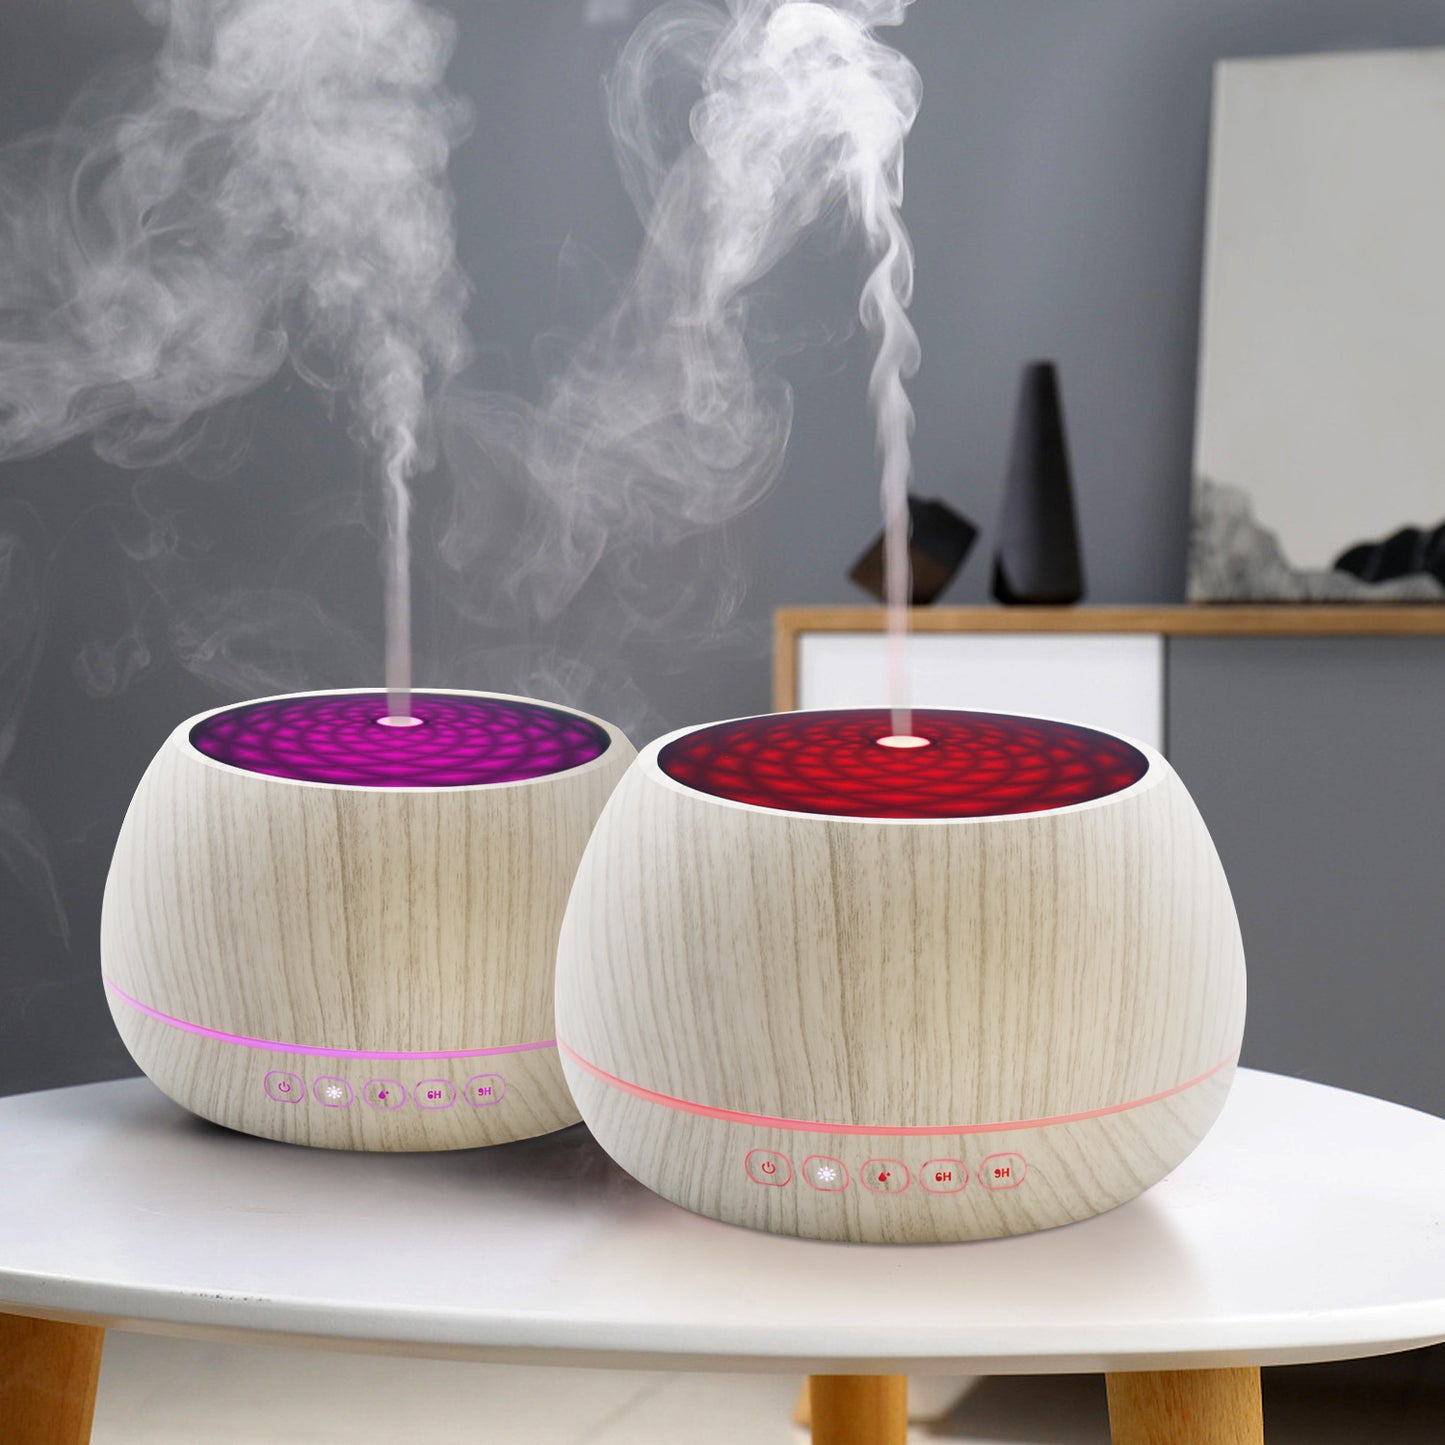 Luxury Multifunction 1000ml 7 Colors Essential Oil Aroma Diffuser Blue tooth With Negative Ion Purification